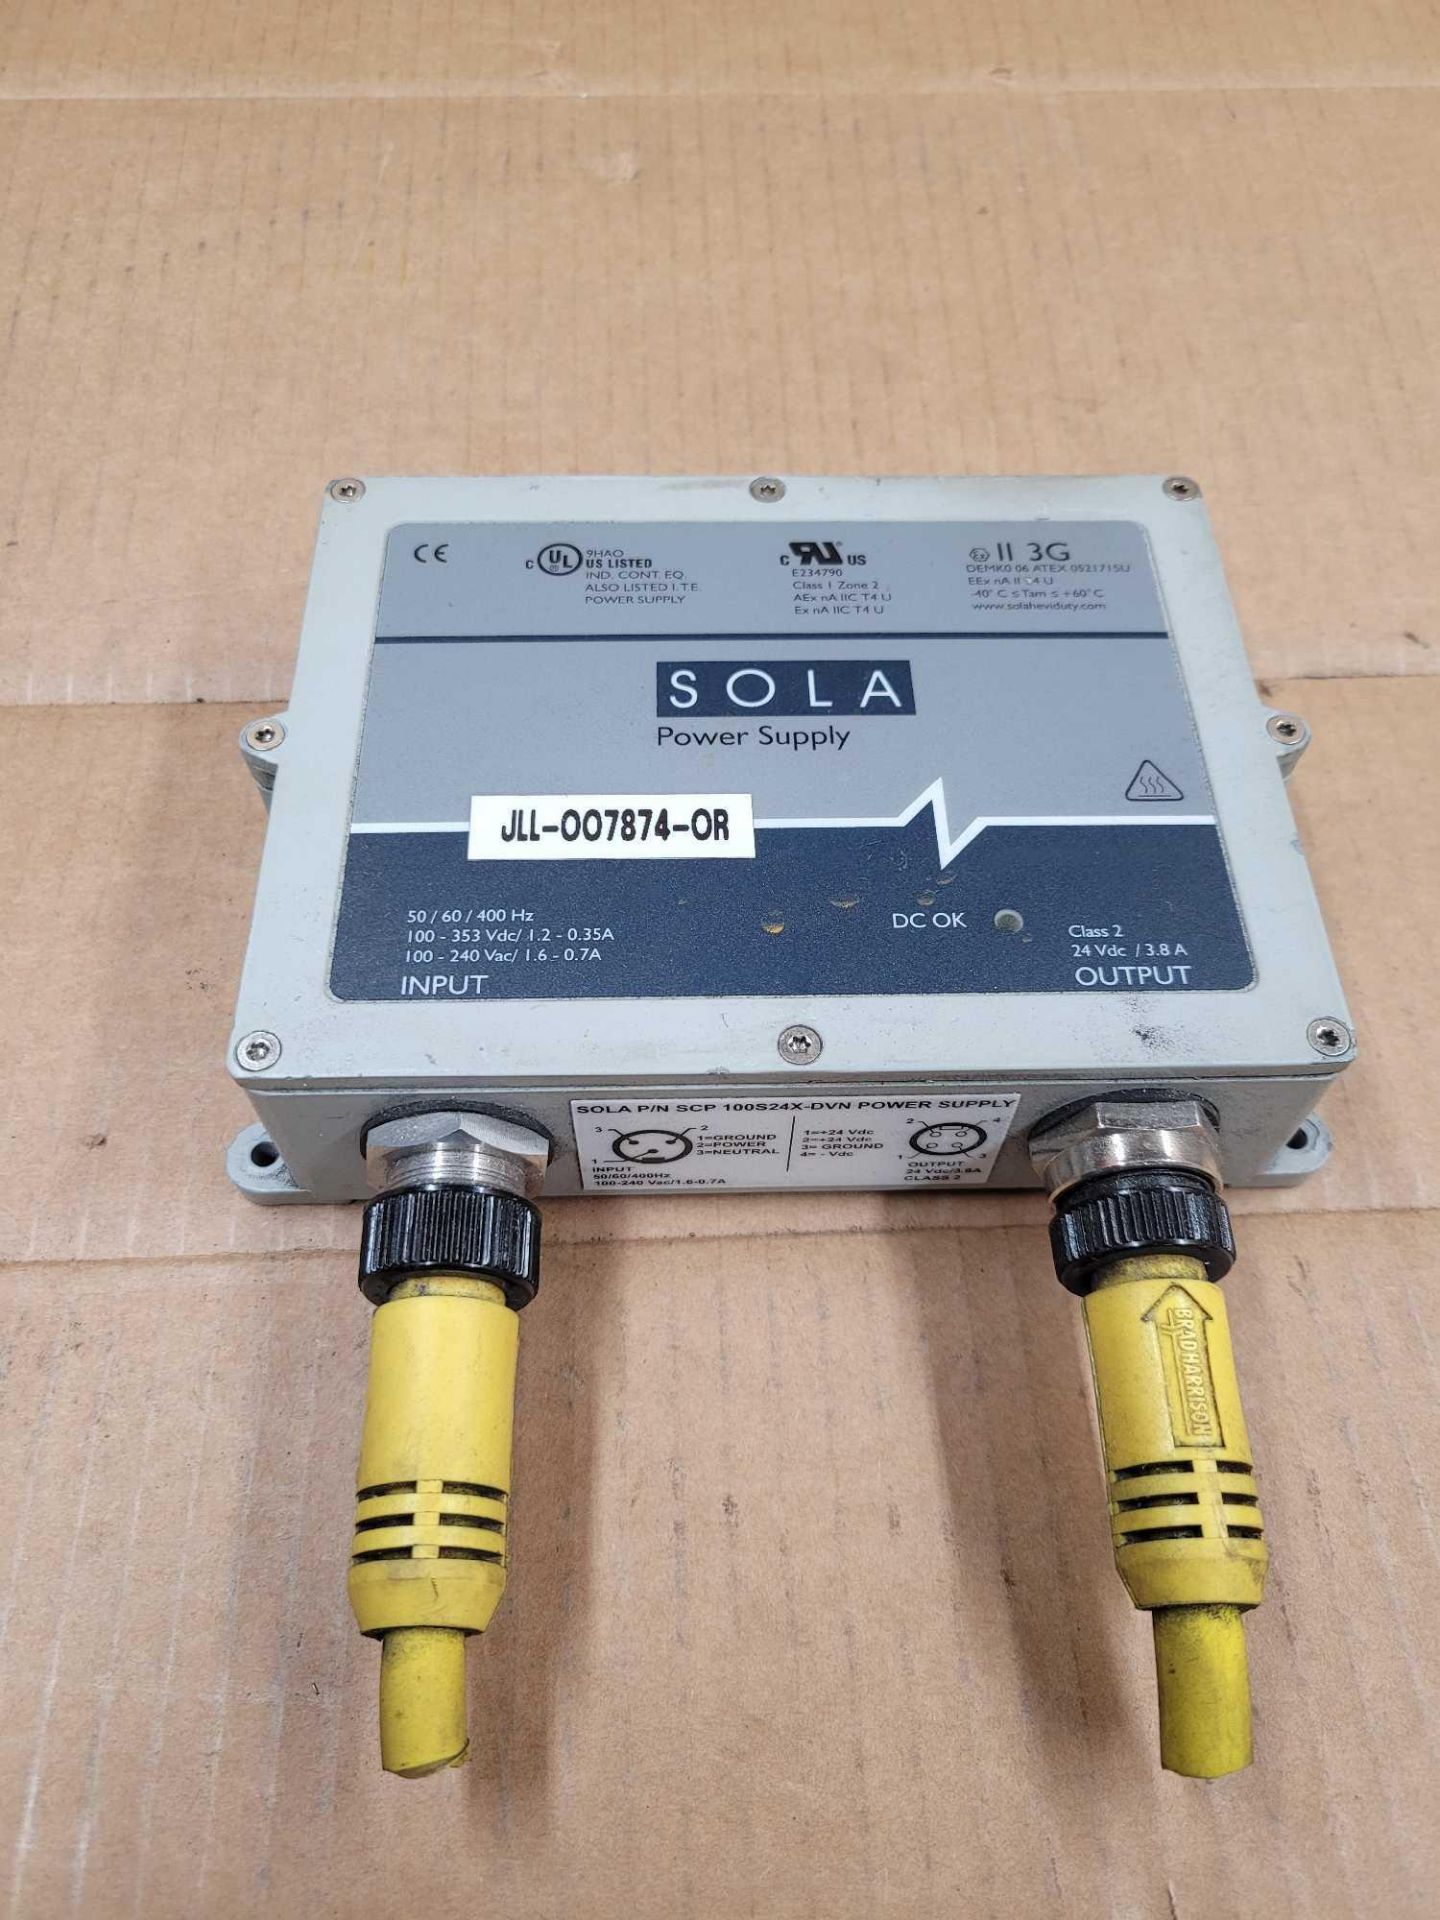 LOT OF 4 SOLA SCP 100S24X-DVN / Power Supply  /  Lot Weight: 12.4 lbs - Image 2 of 6